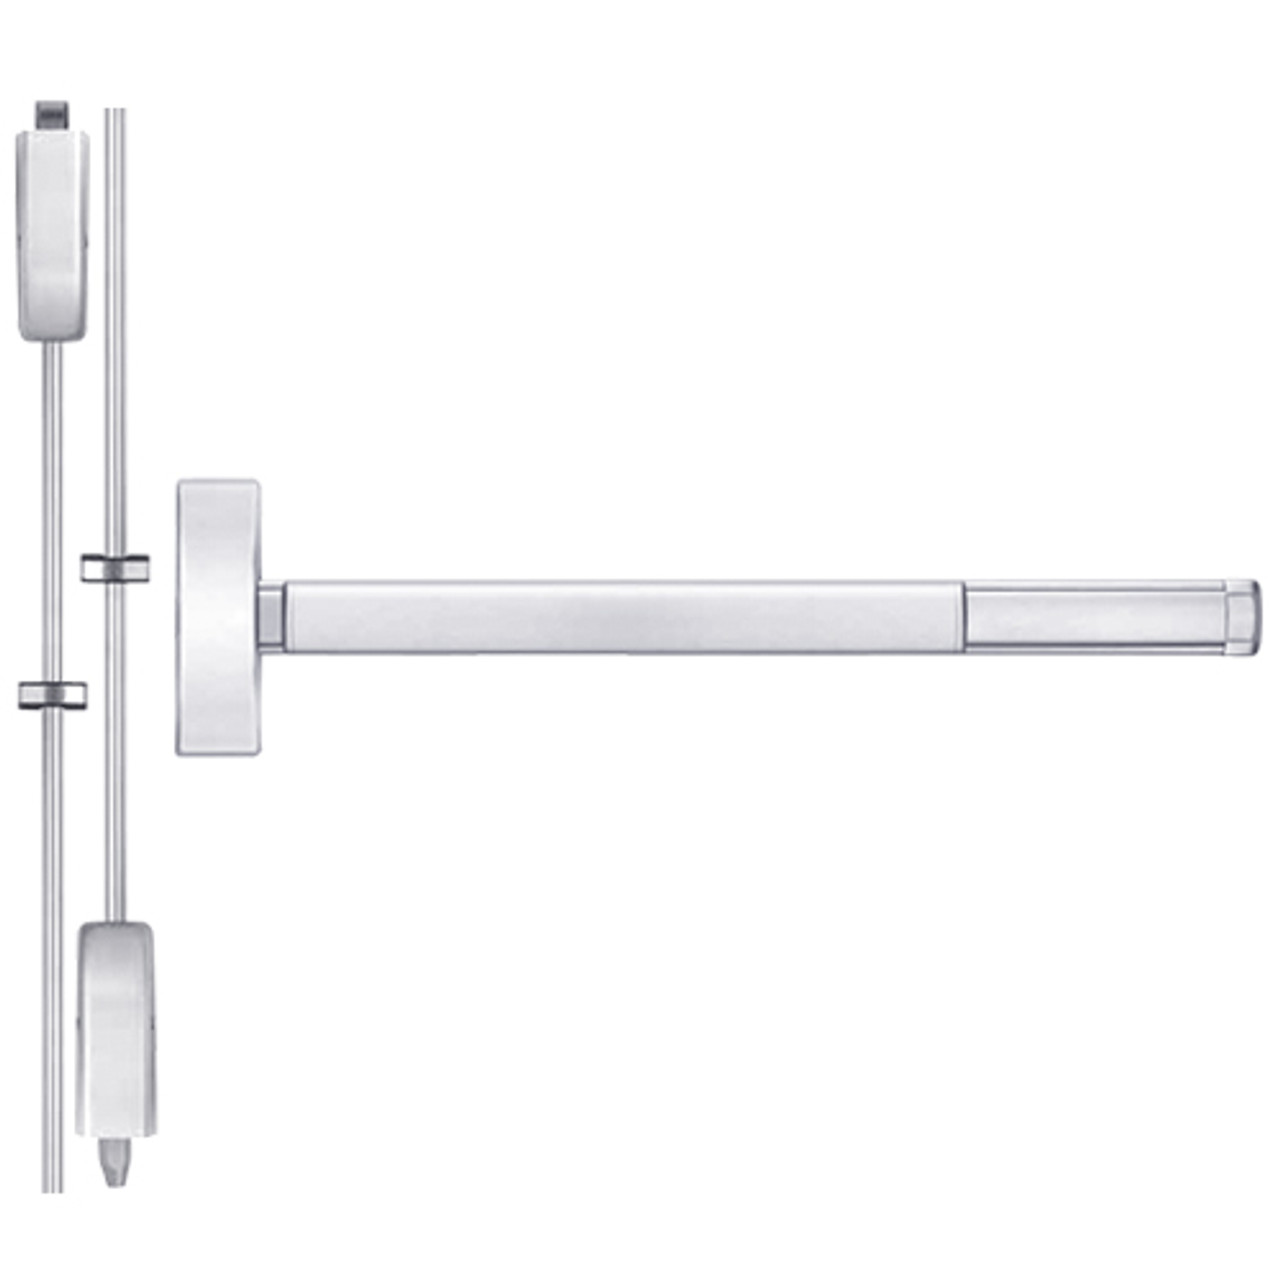 DEFL2203-625-36 PHI 2200 Series Fire Rated Apex Surface Vertical Rod Device with Delayed Egress Prepped for Key Retracts Latchbolt in Bright Chrome Finish